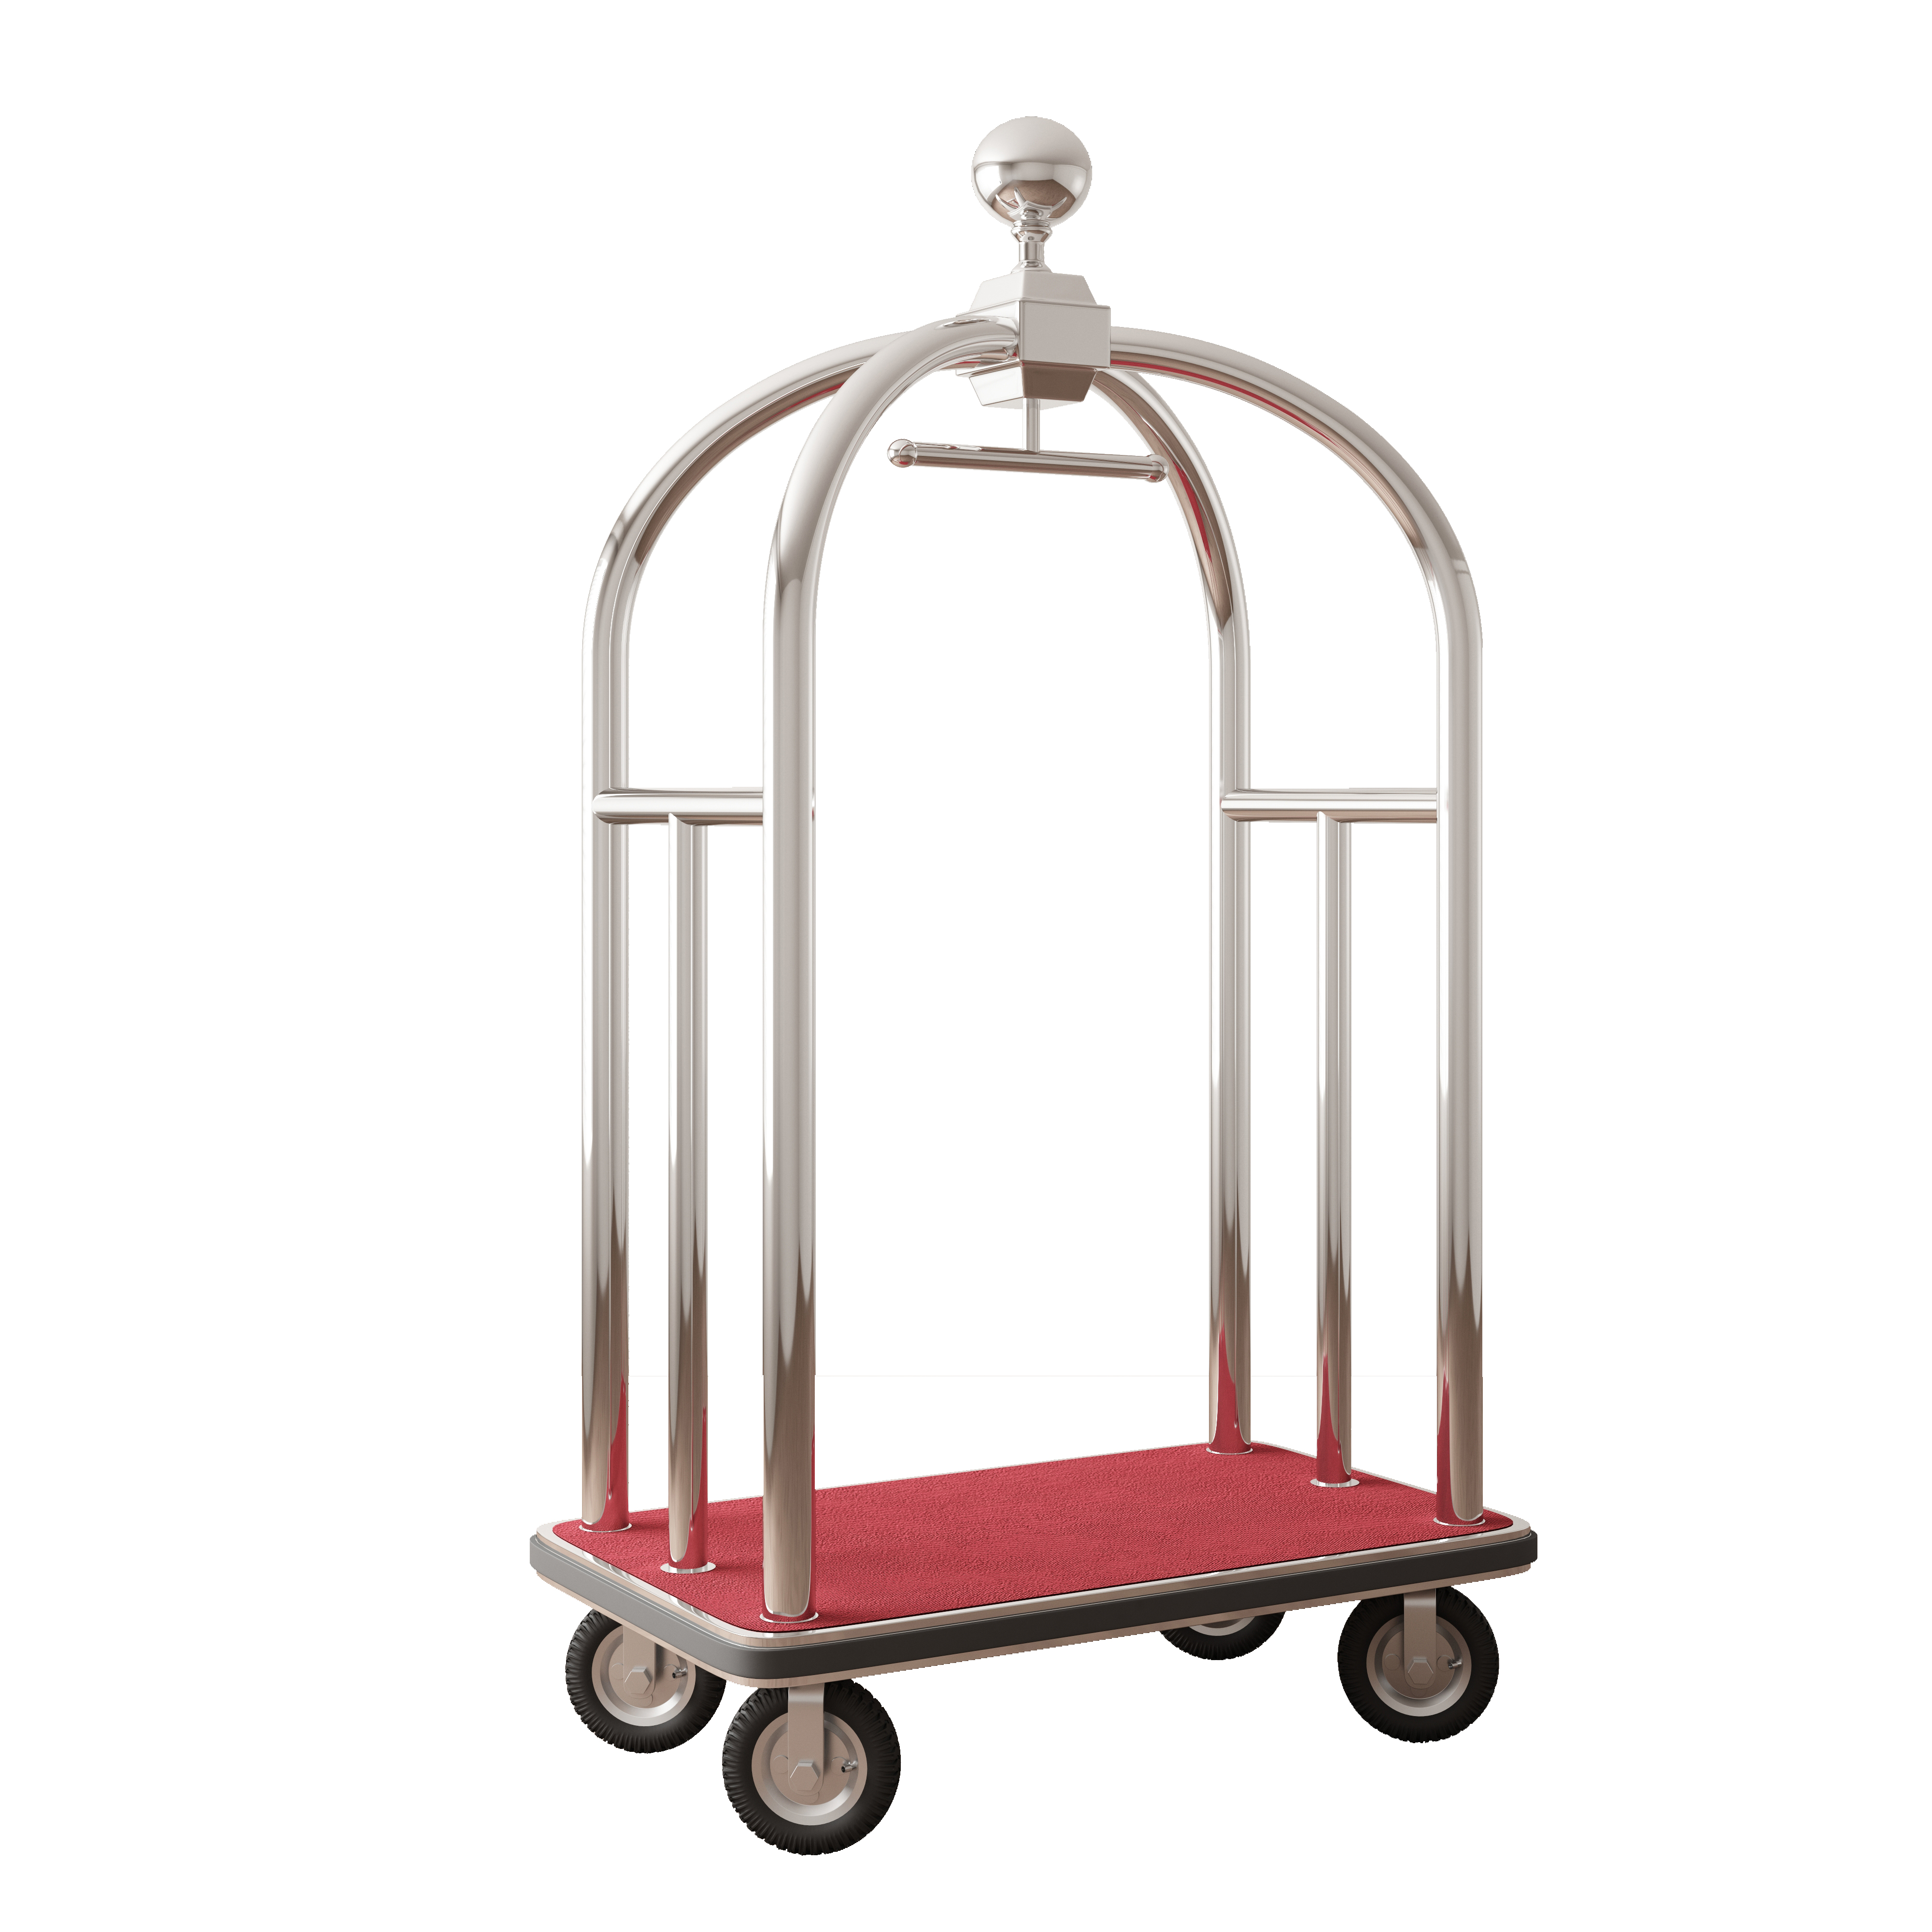 Hotel Hospitality: The Versatility of Trolleys in Guest Services